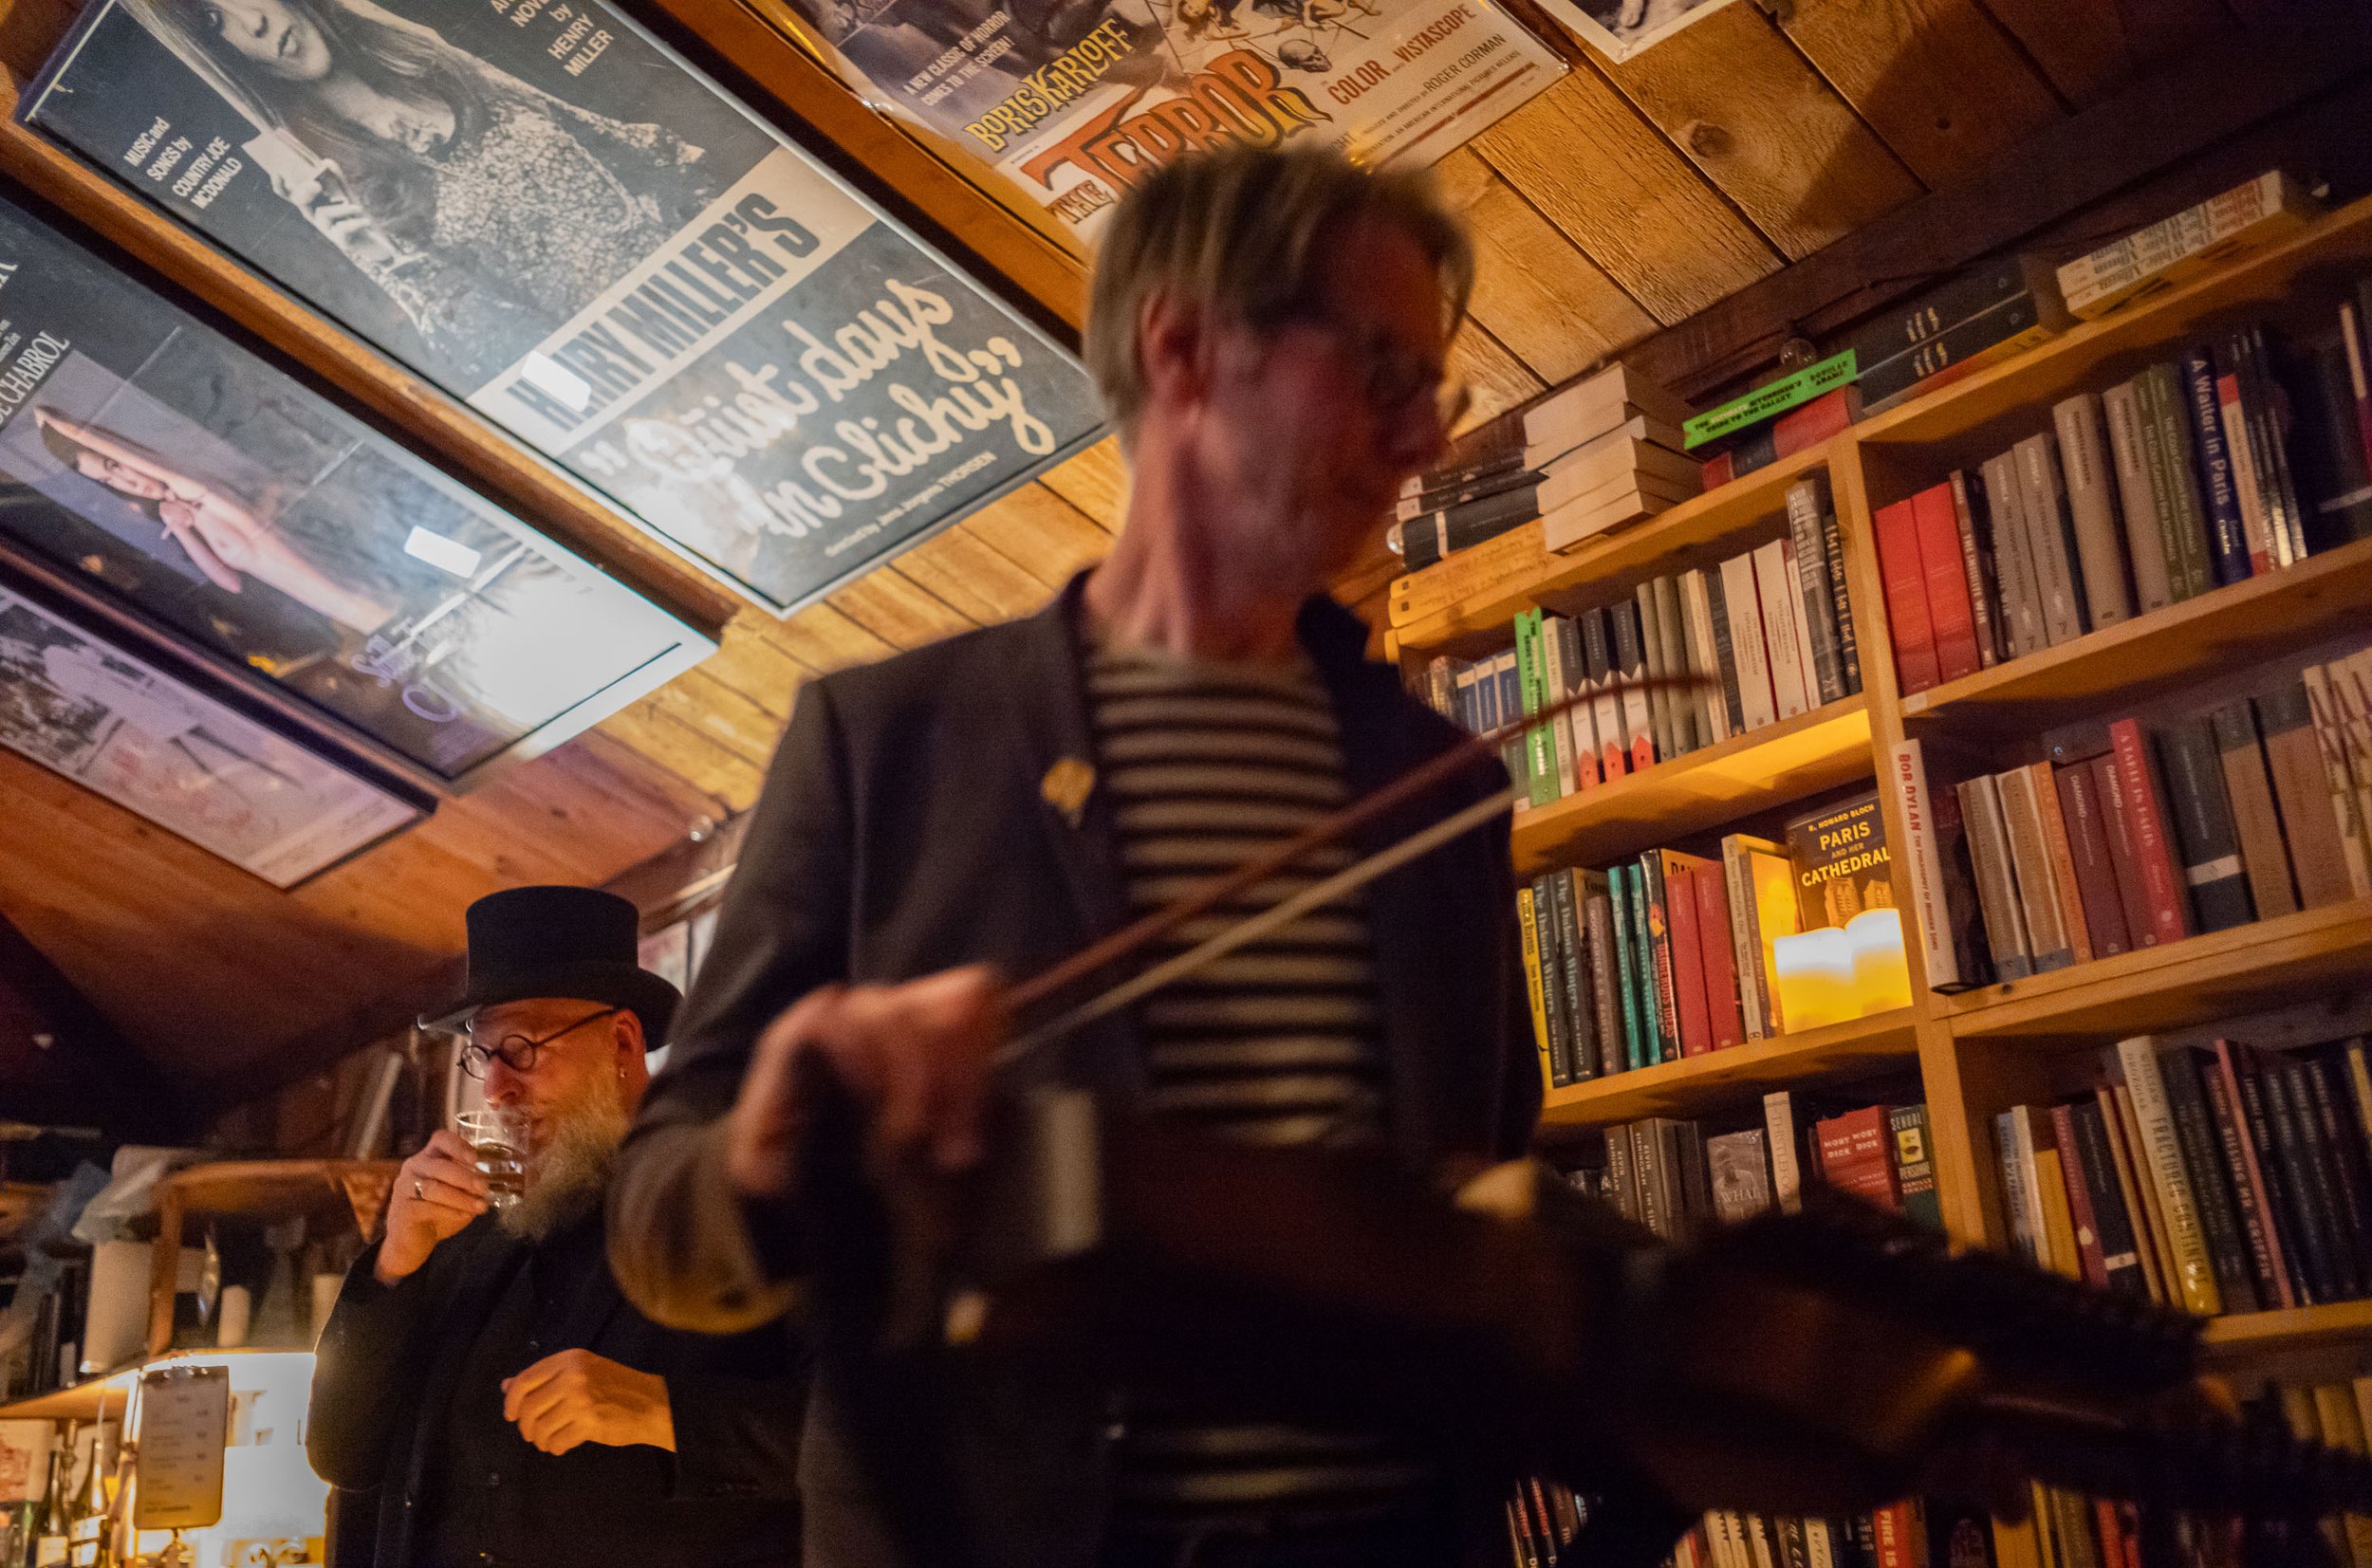  The Swedish band Väsen performs at the Henry Miller Memorial Library in Big Sur, California, USA on March 30, 2023. 